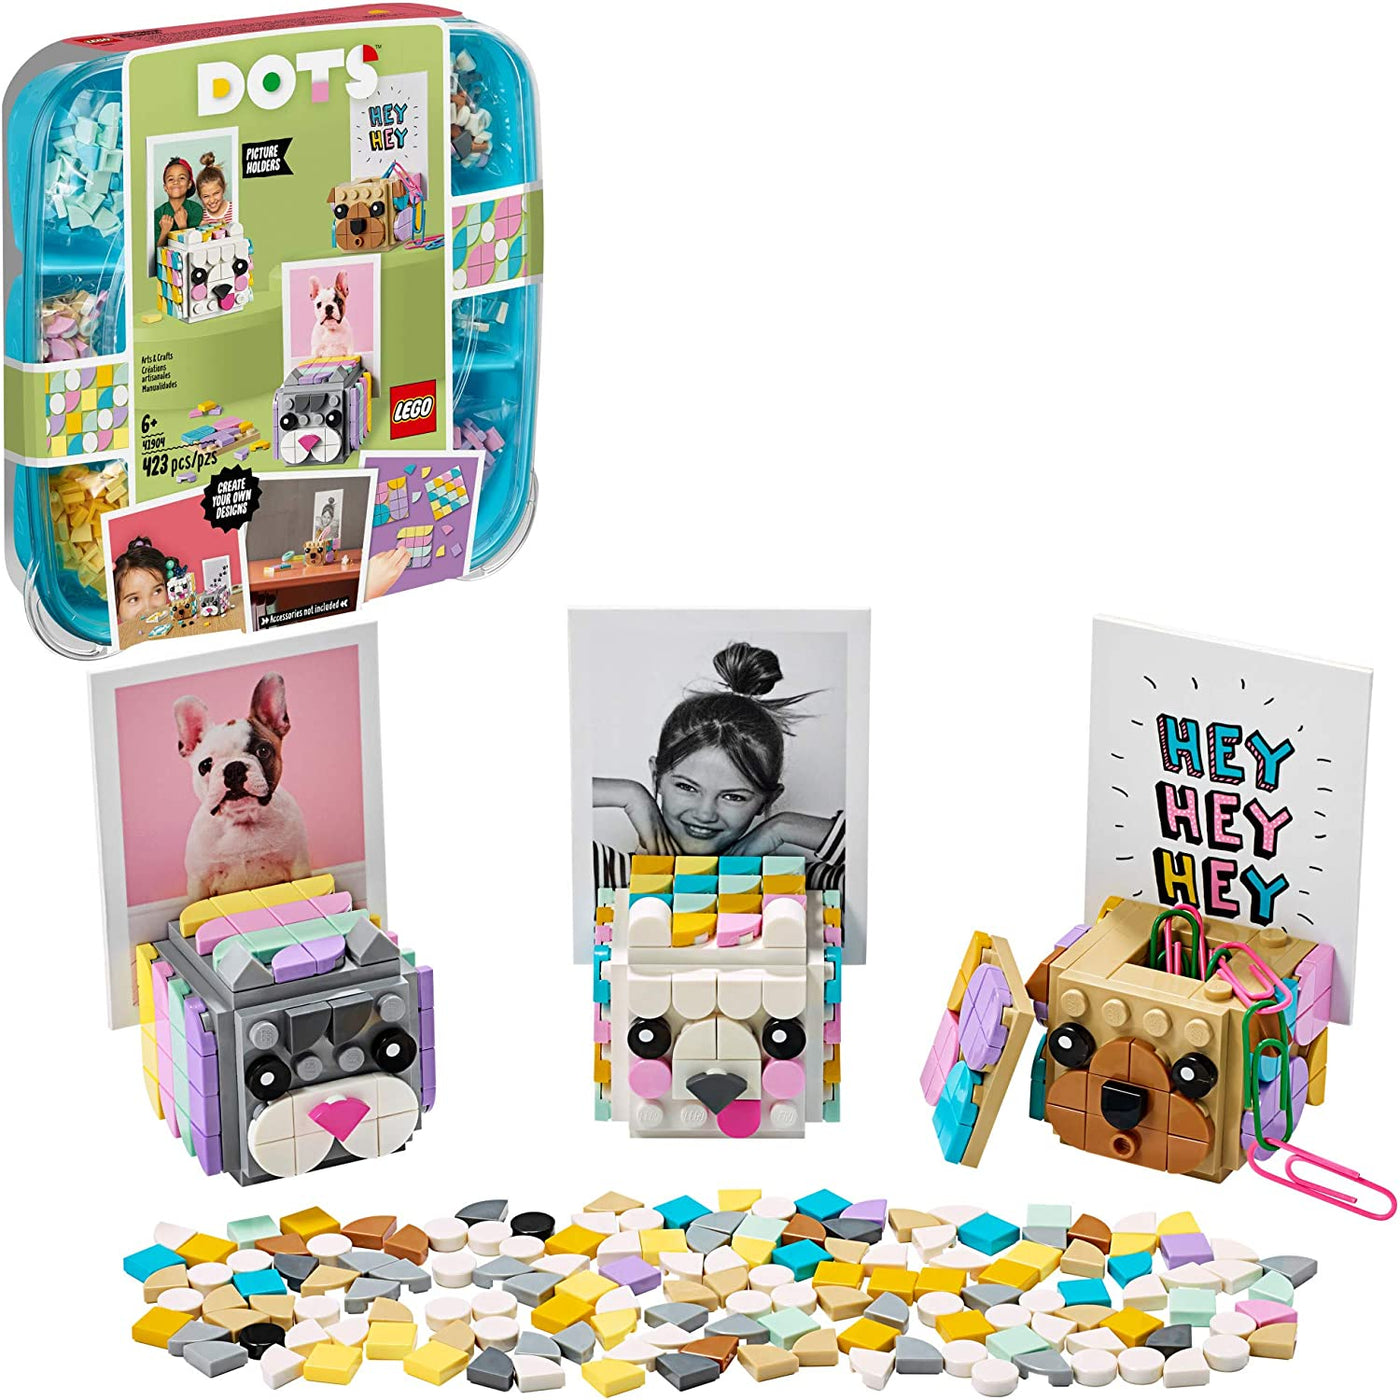 LEGO DOTS Animal Picture Holders, 41904